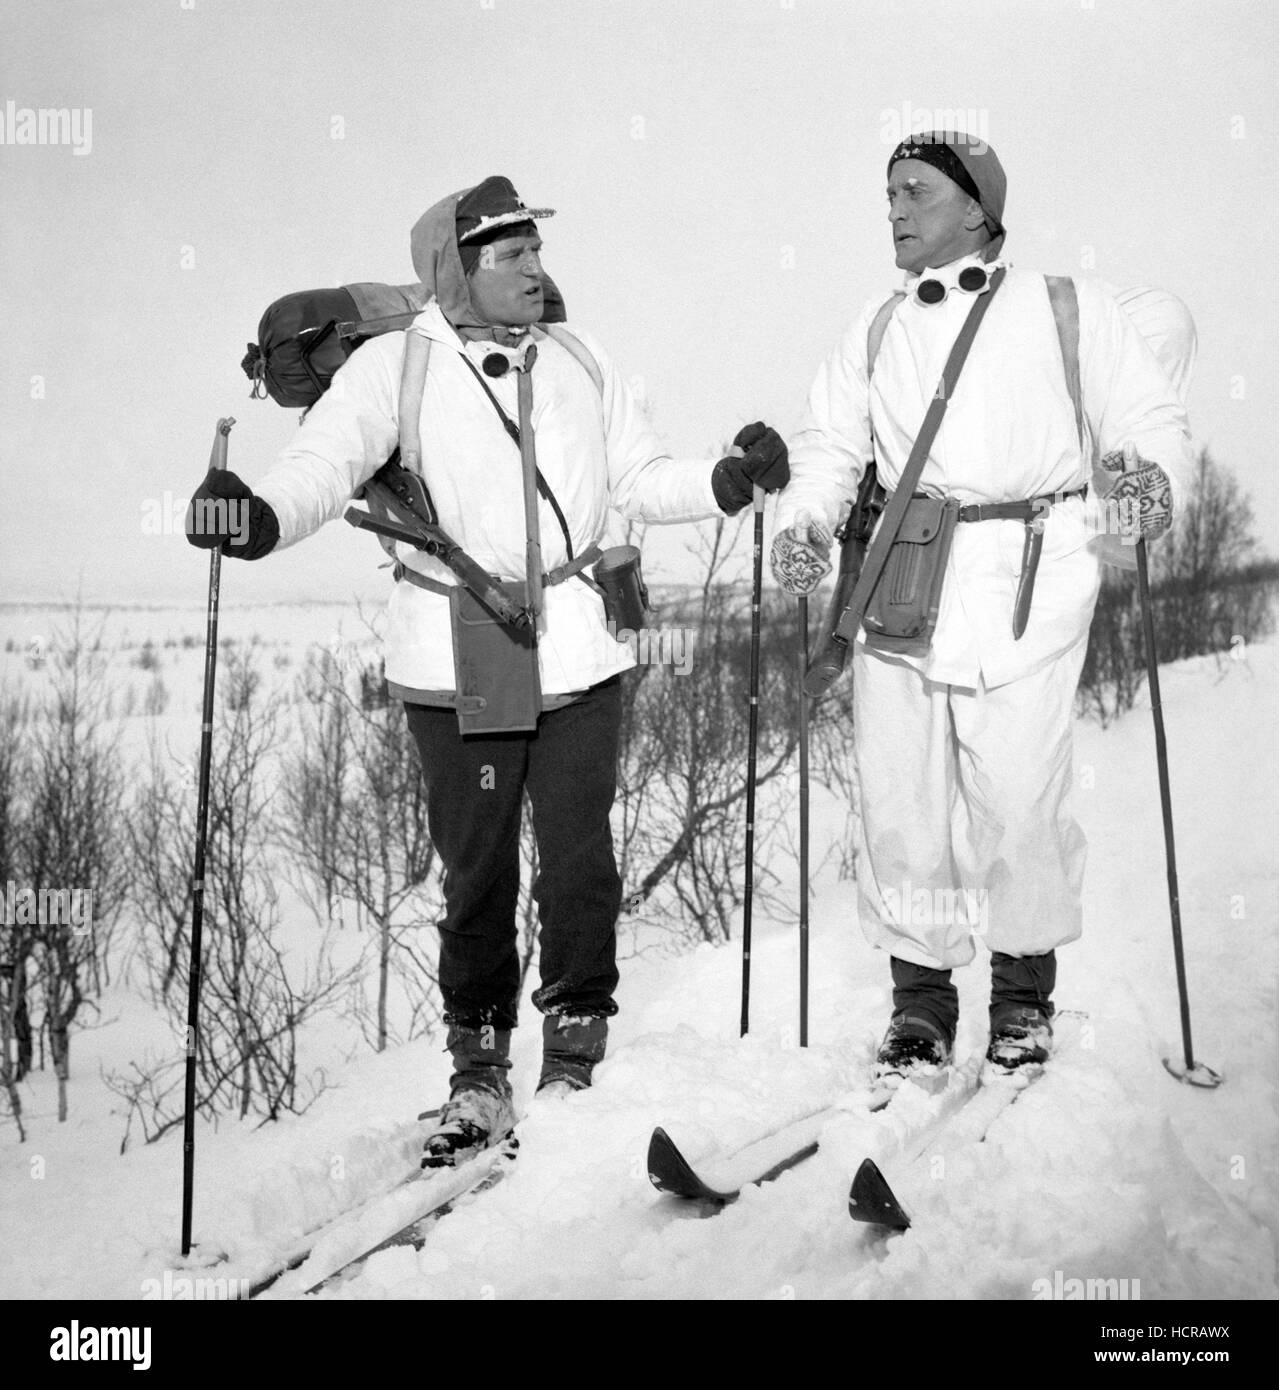 File photo dated 02/03/65 of actors Richard Harris (left) and Kirk Douglas ploughing through heavy snow in Norway while on location for the war film The Heroes of Telemark. Douglas is celebrating his 100th birthday today. Stock Photo